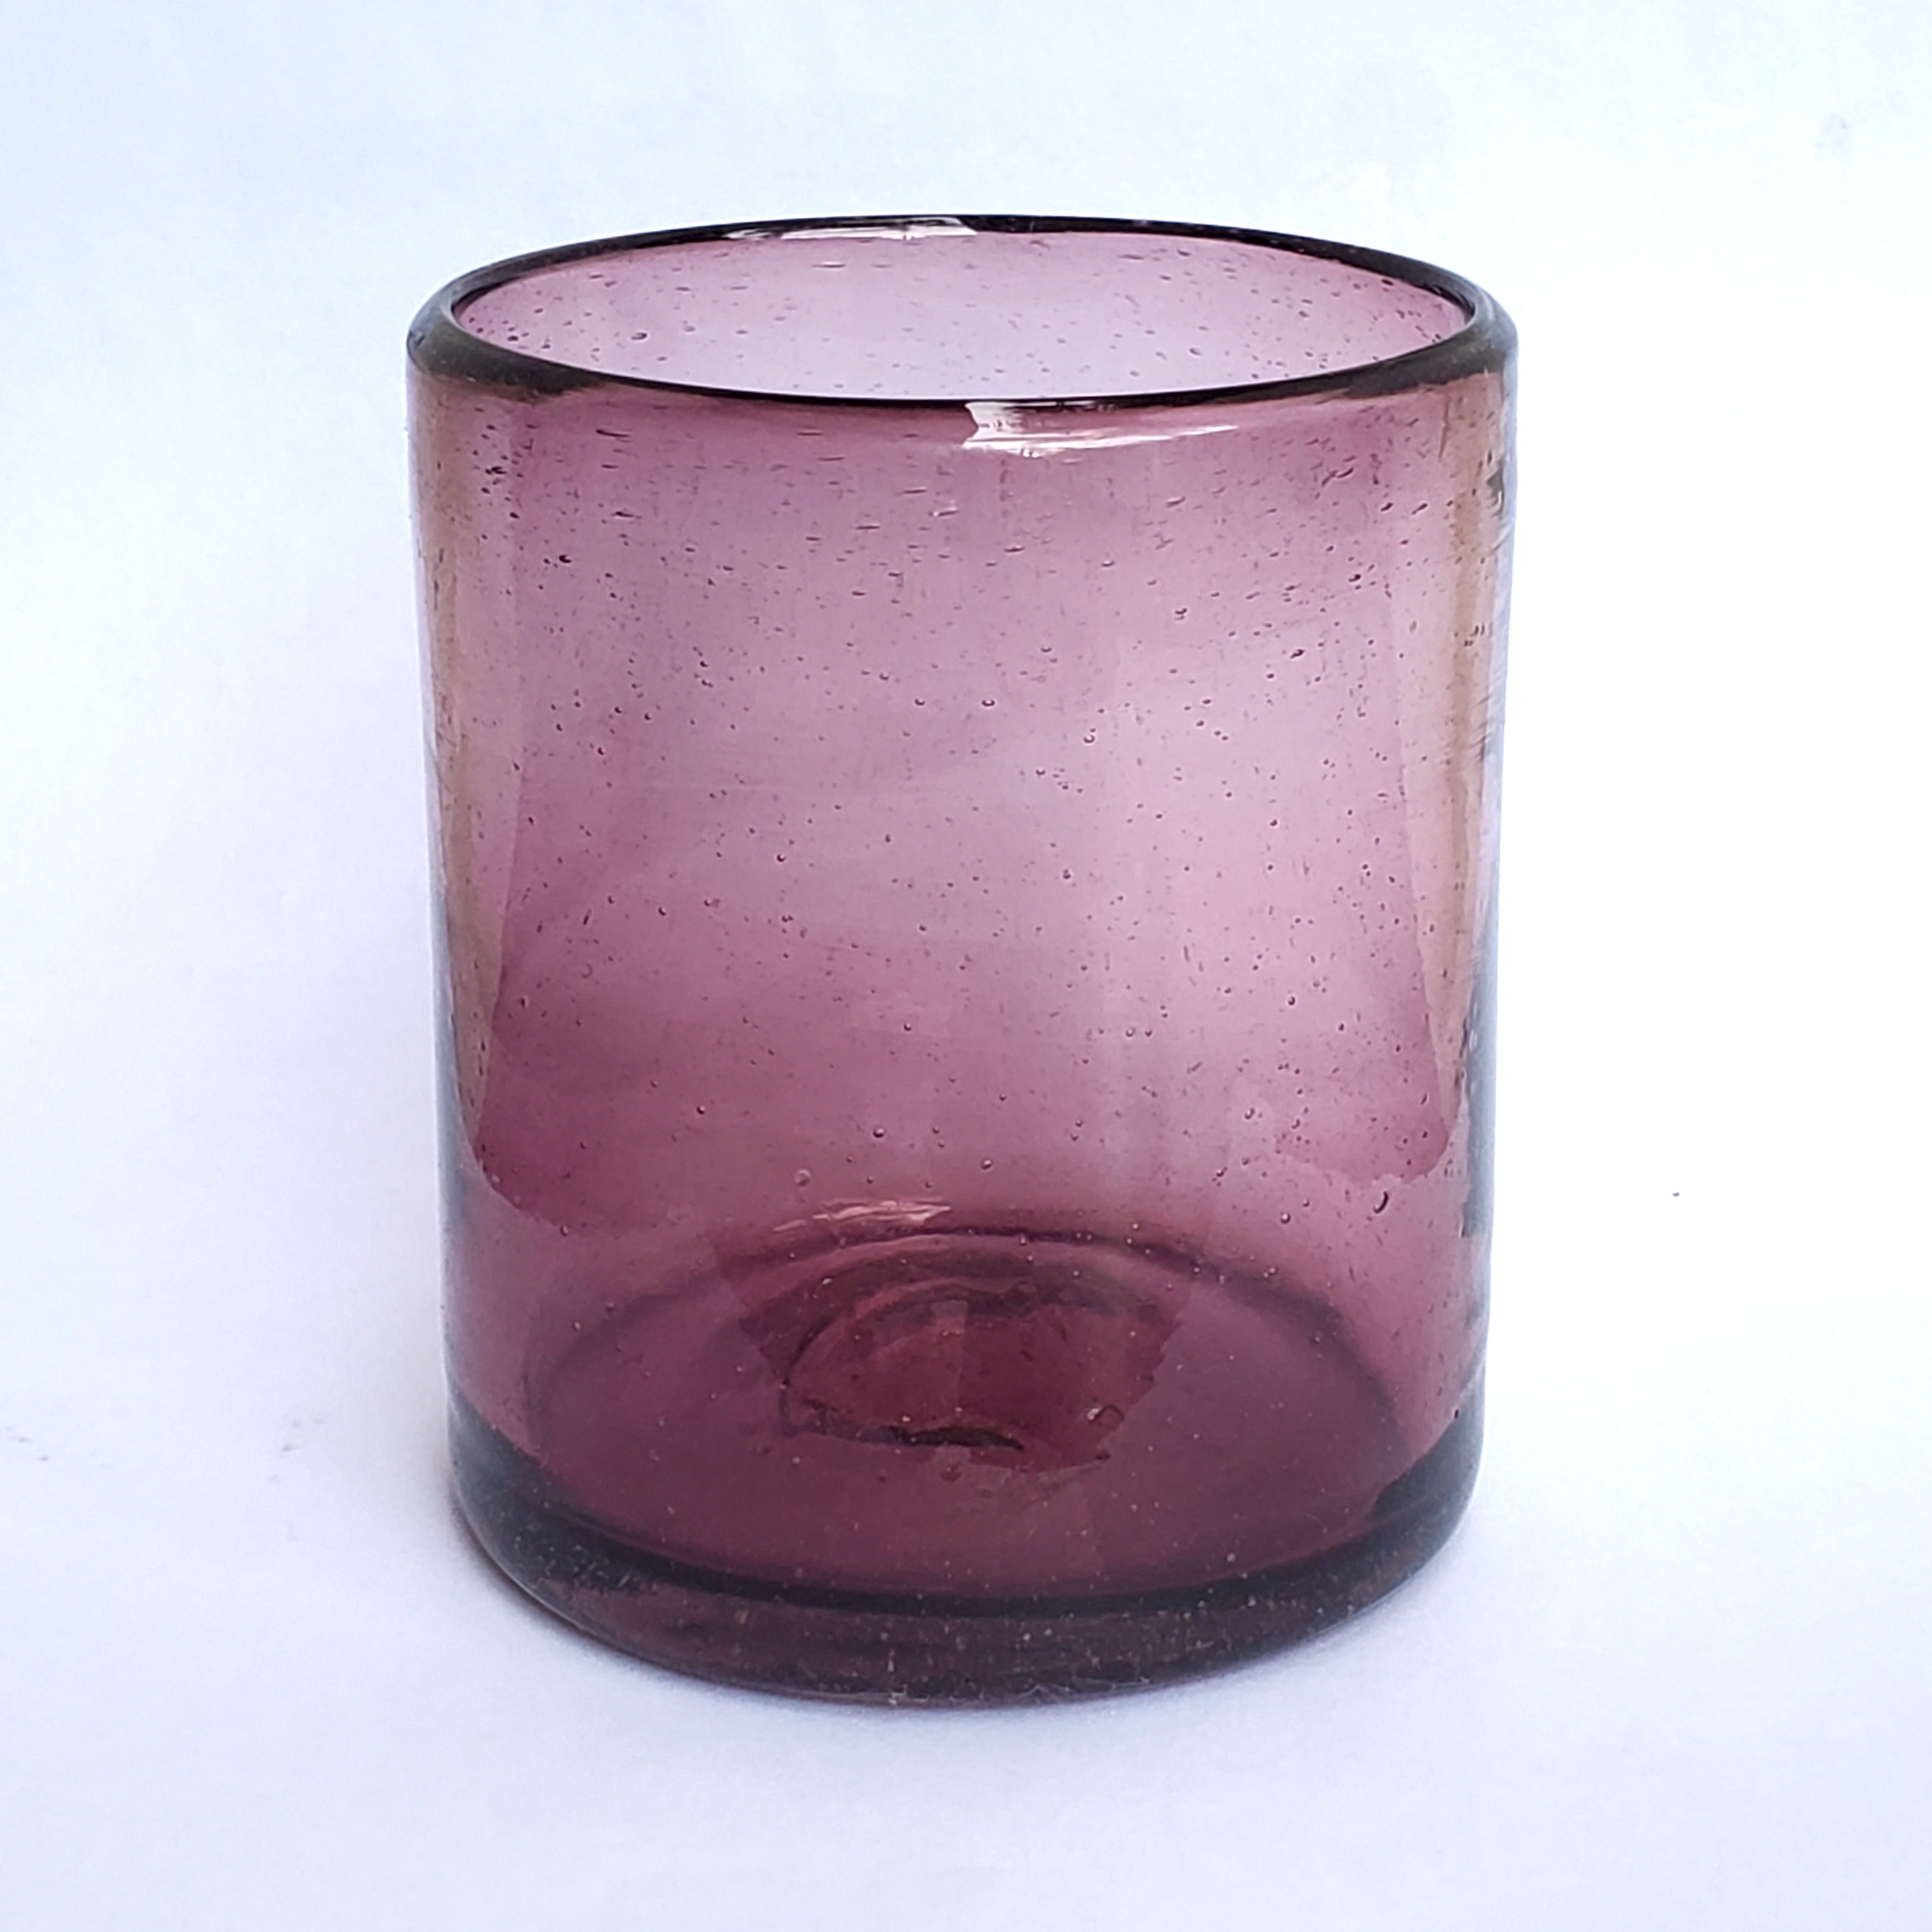 Wholesale Colored Glassware / Solid Amethyst 9 oz Short Tumblers  / Enhance your table setting with our beautiful Amethyst colored glasses.